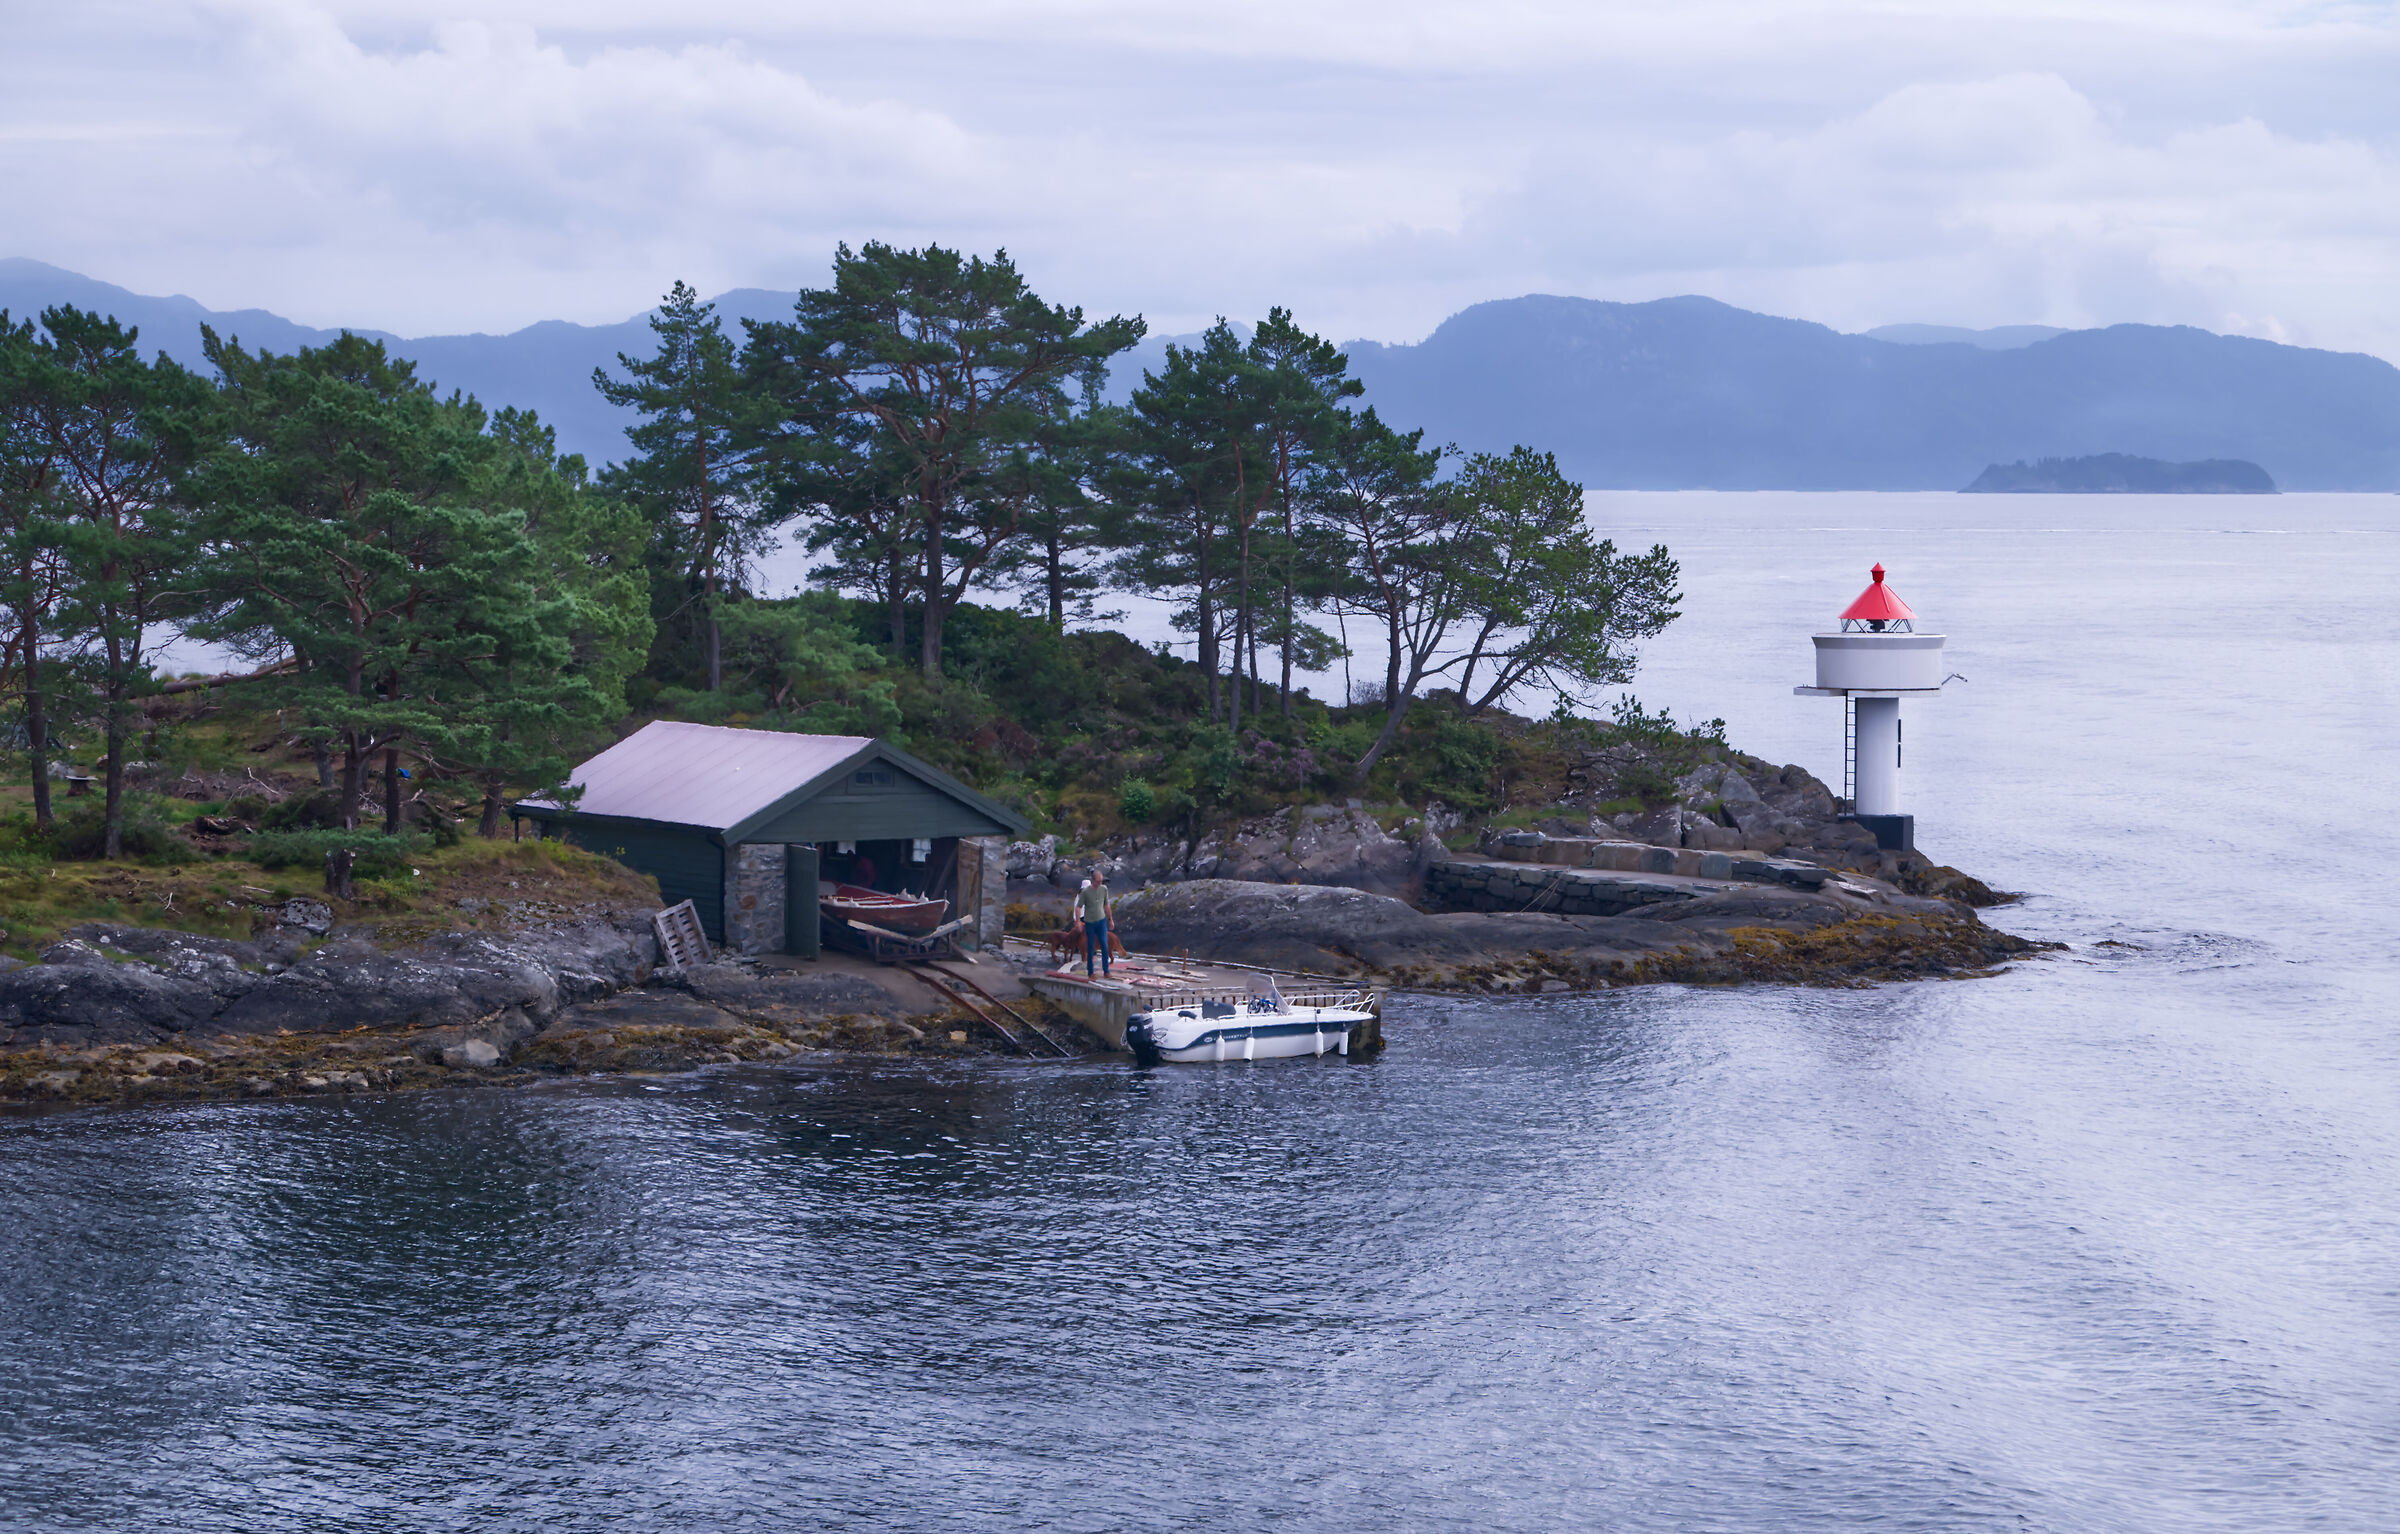 The lighthouse in the fjord...